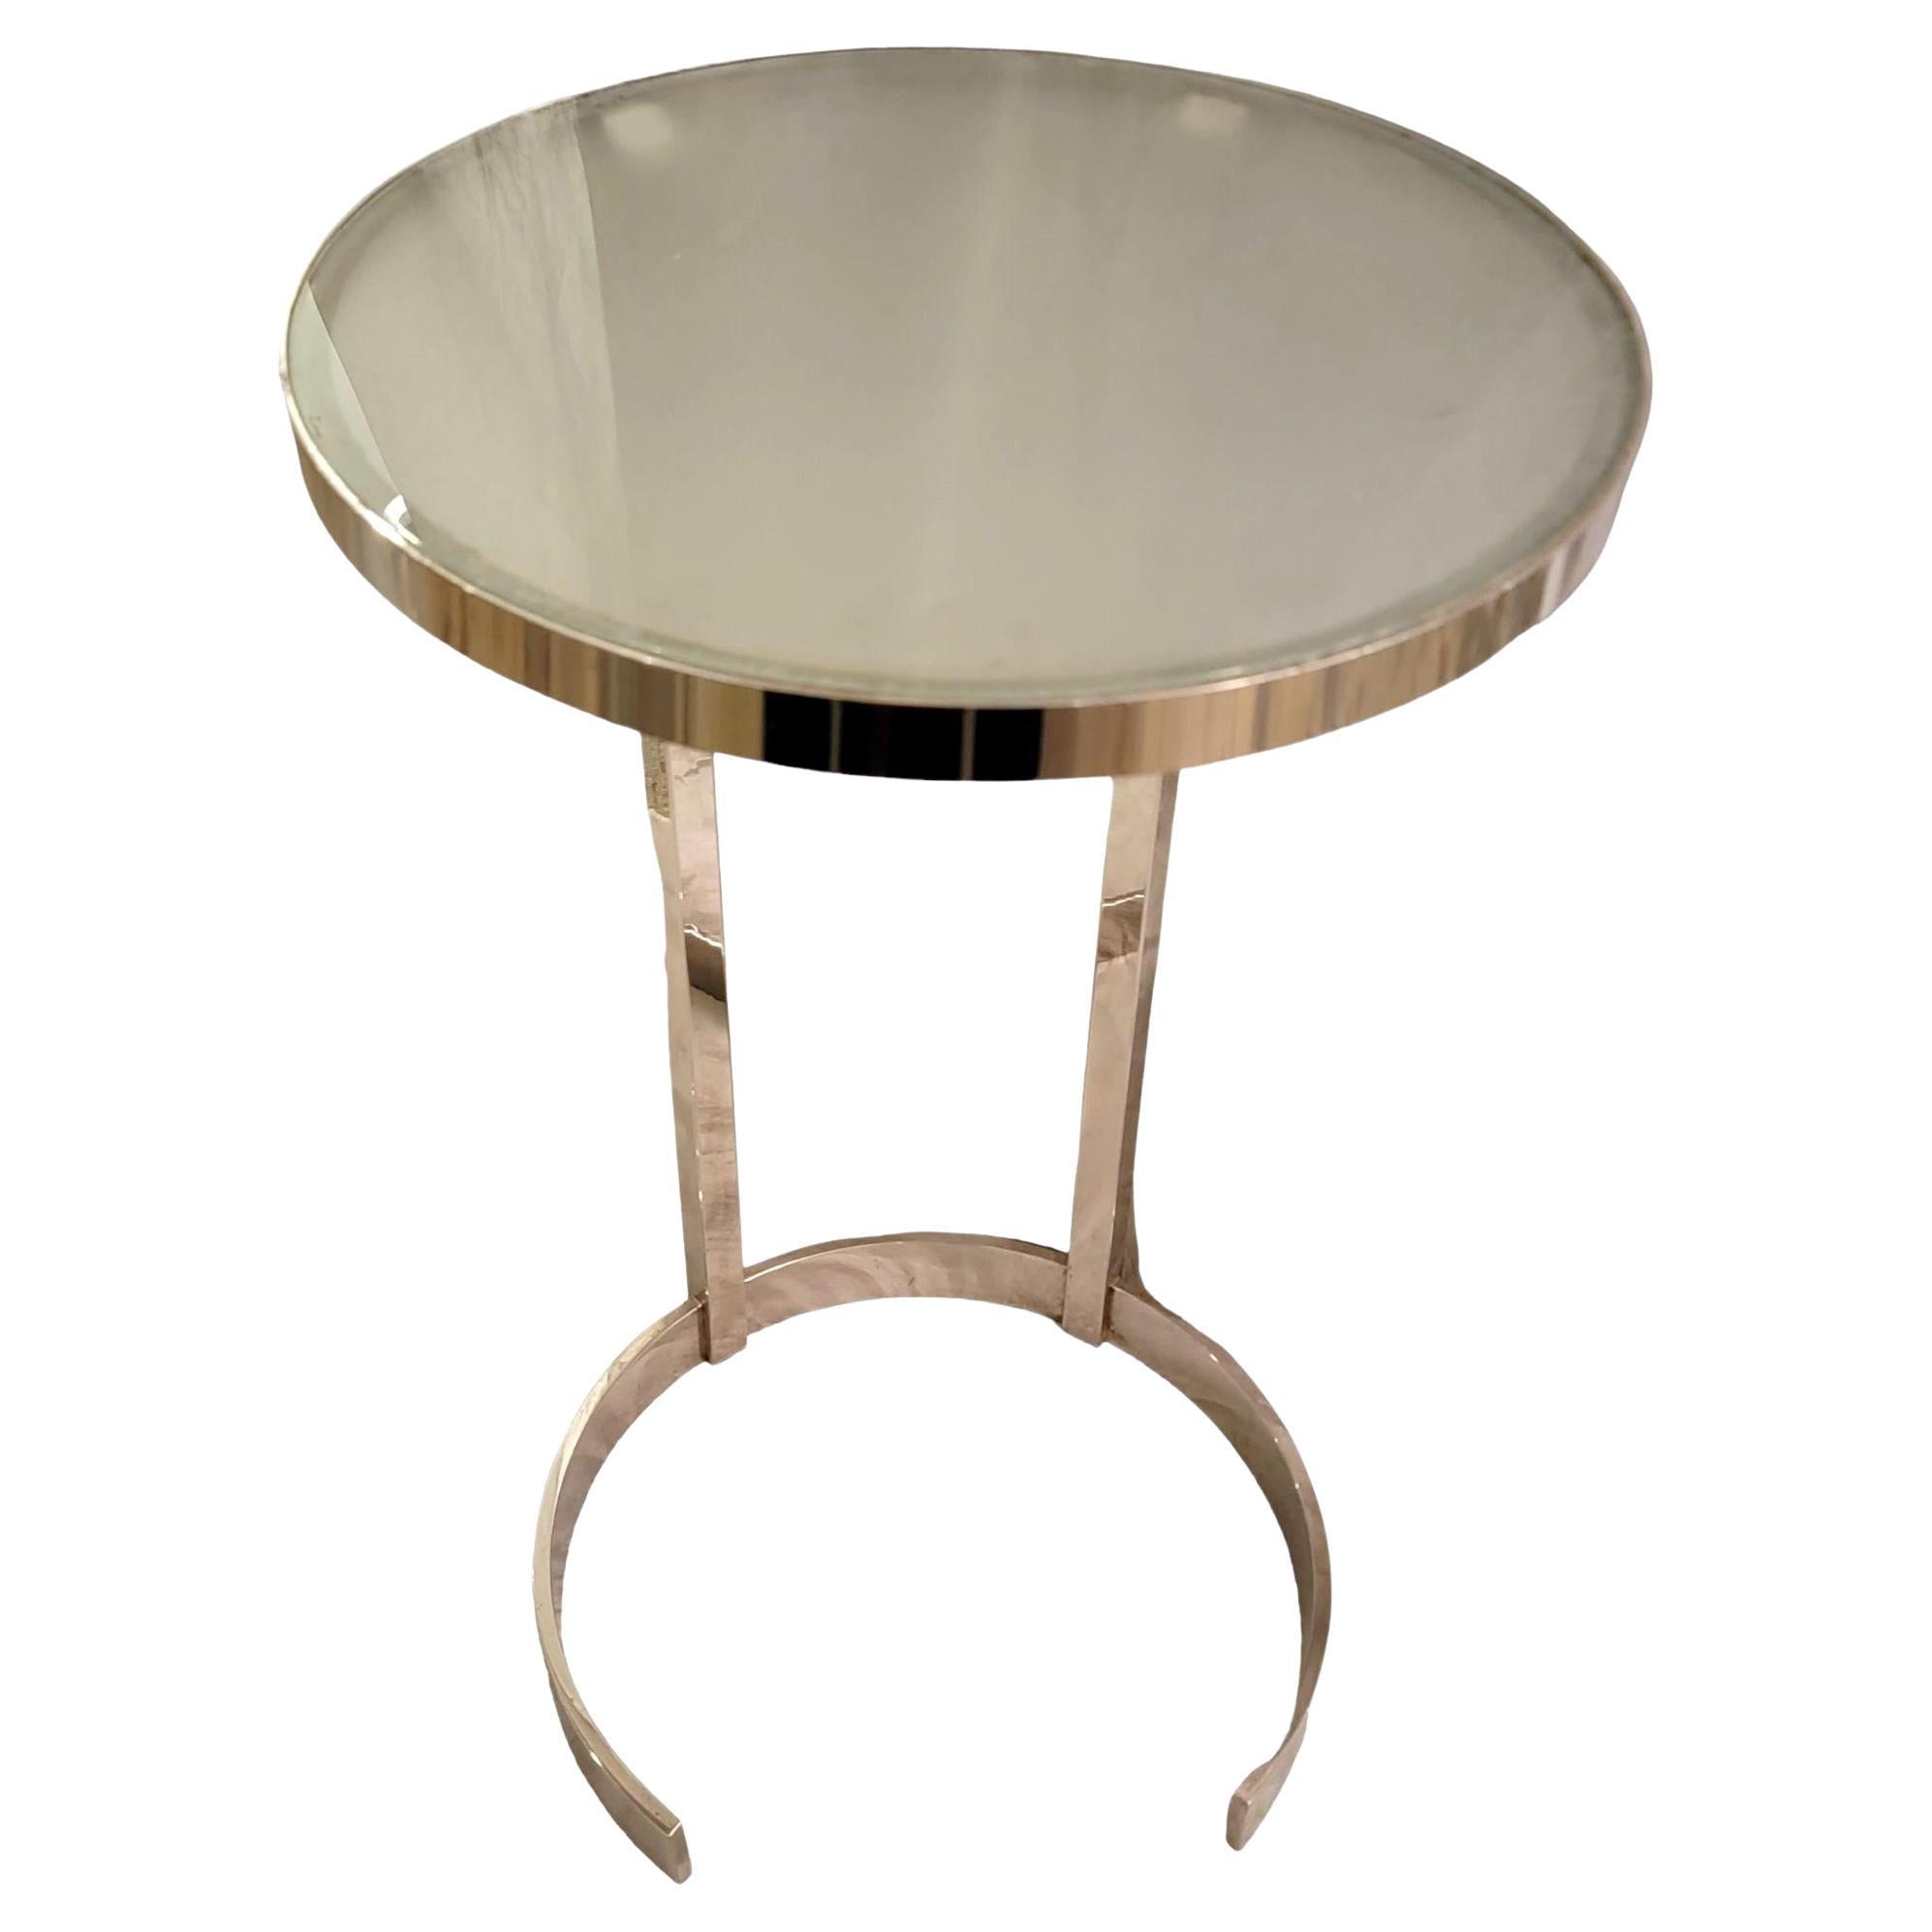 1970s Italian Chrome and White Smoked Glass Side Table